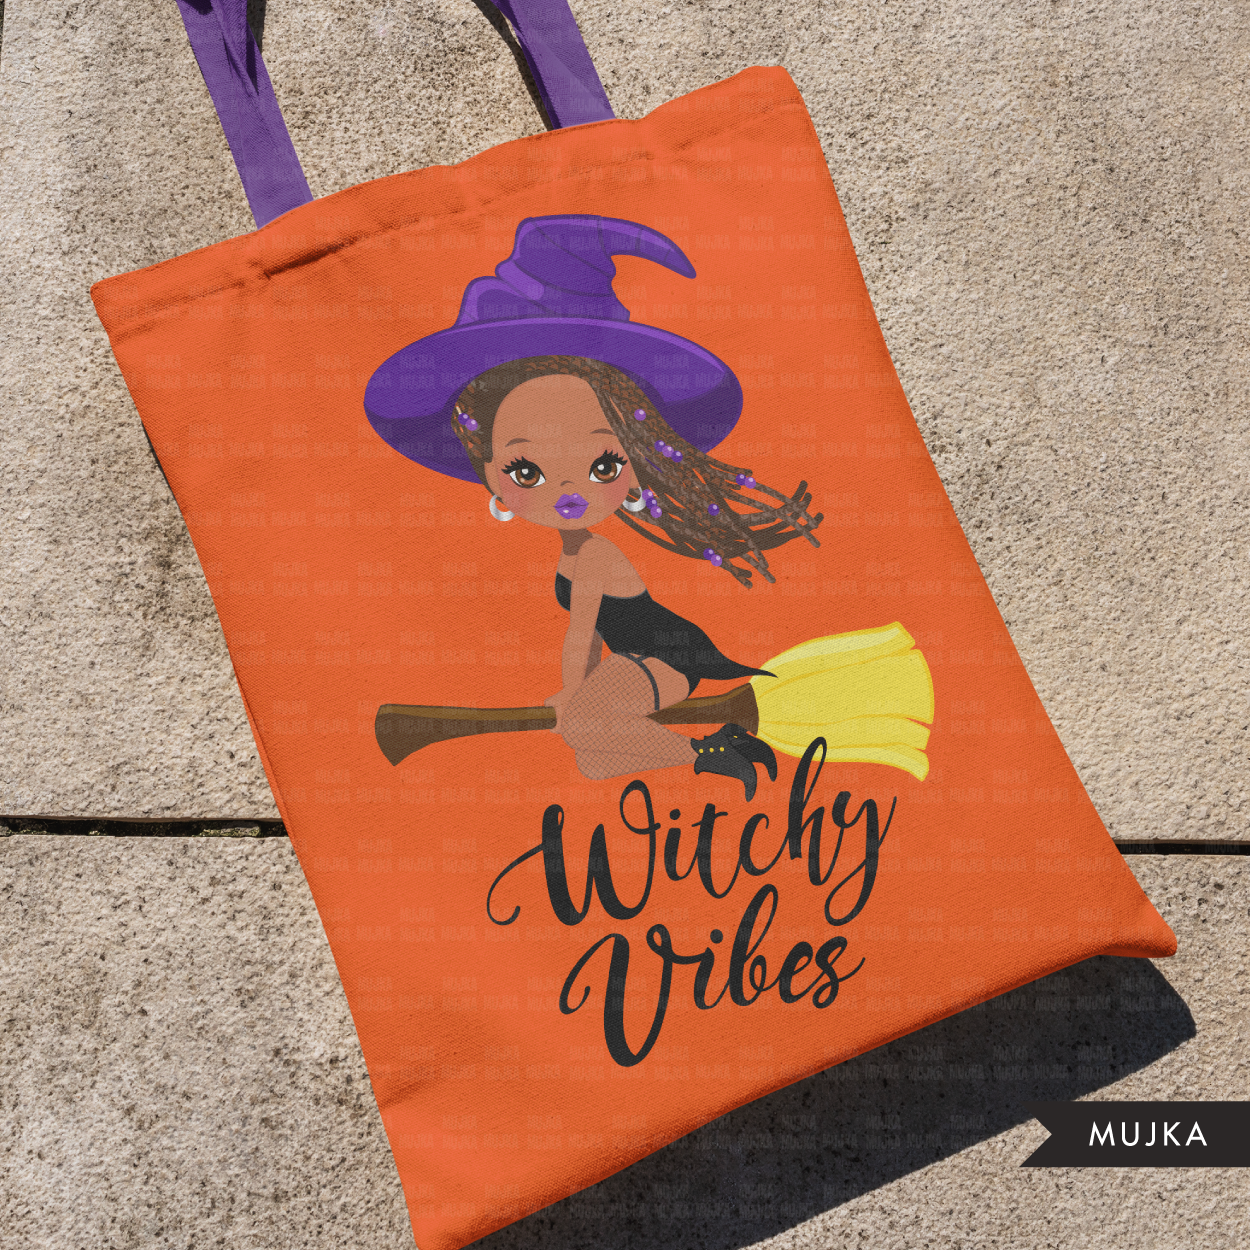 Halloween png, Halloween witch png, witchy vibes sublimation designs, Halloween clipart, witchy vibes, black woman witch Halloween shirt